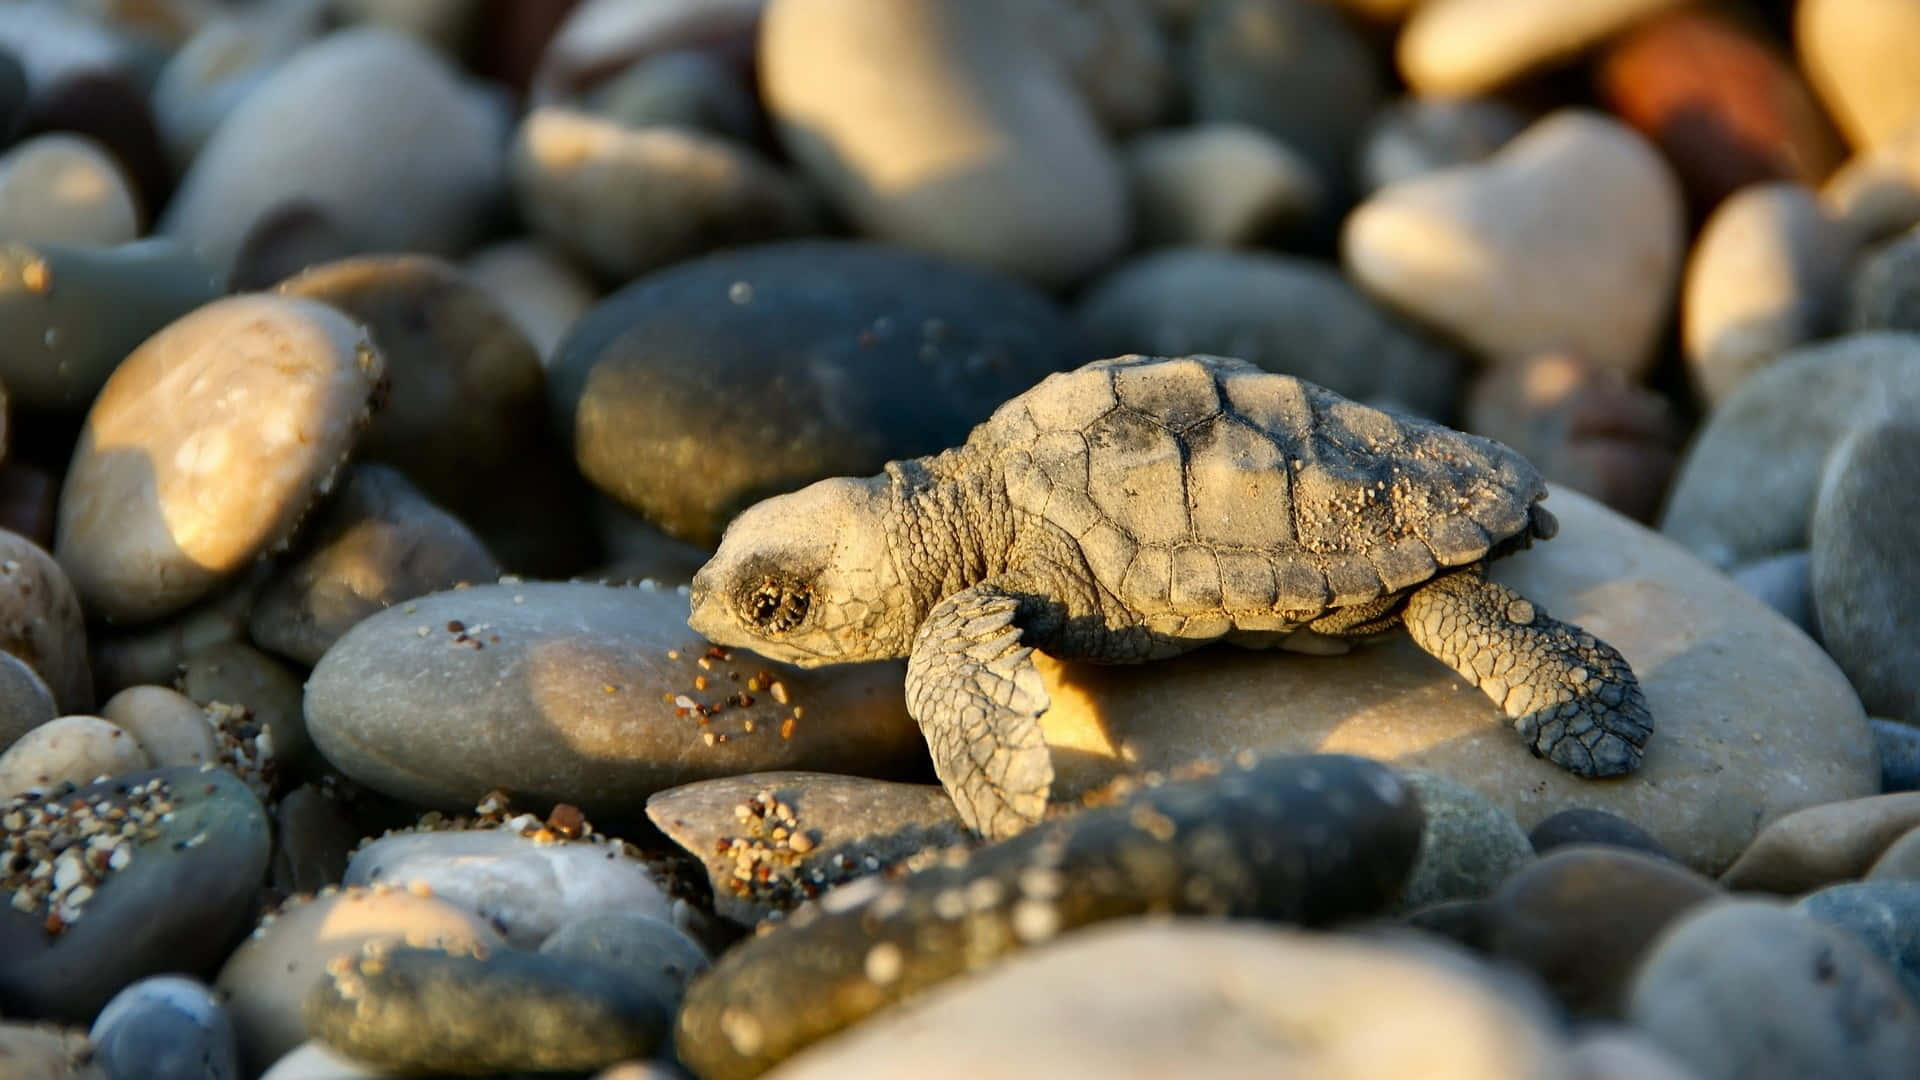 "Look at this adorable baby turtle!". Wallpaper